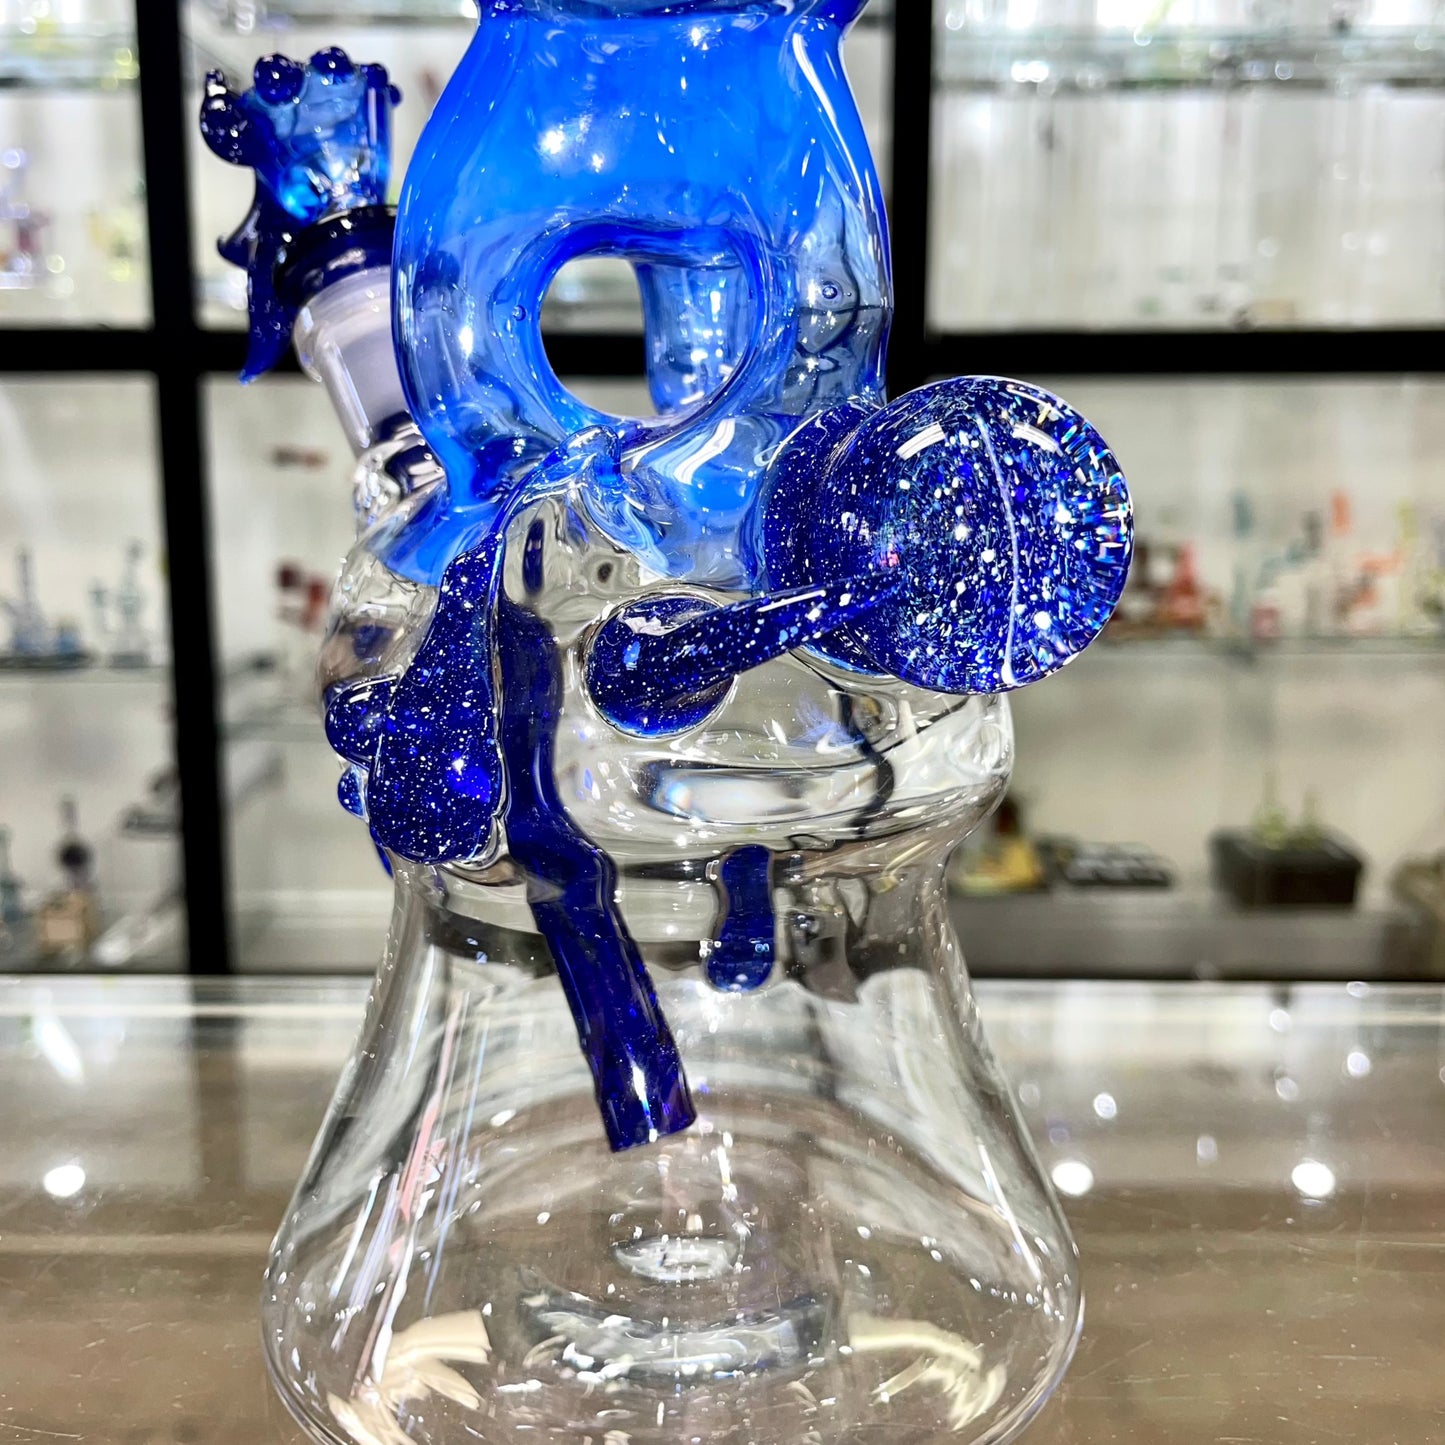 Gibson's Glass 17.5" Triple Threat Tube w/ Blue Blizzard Accents